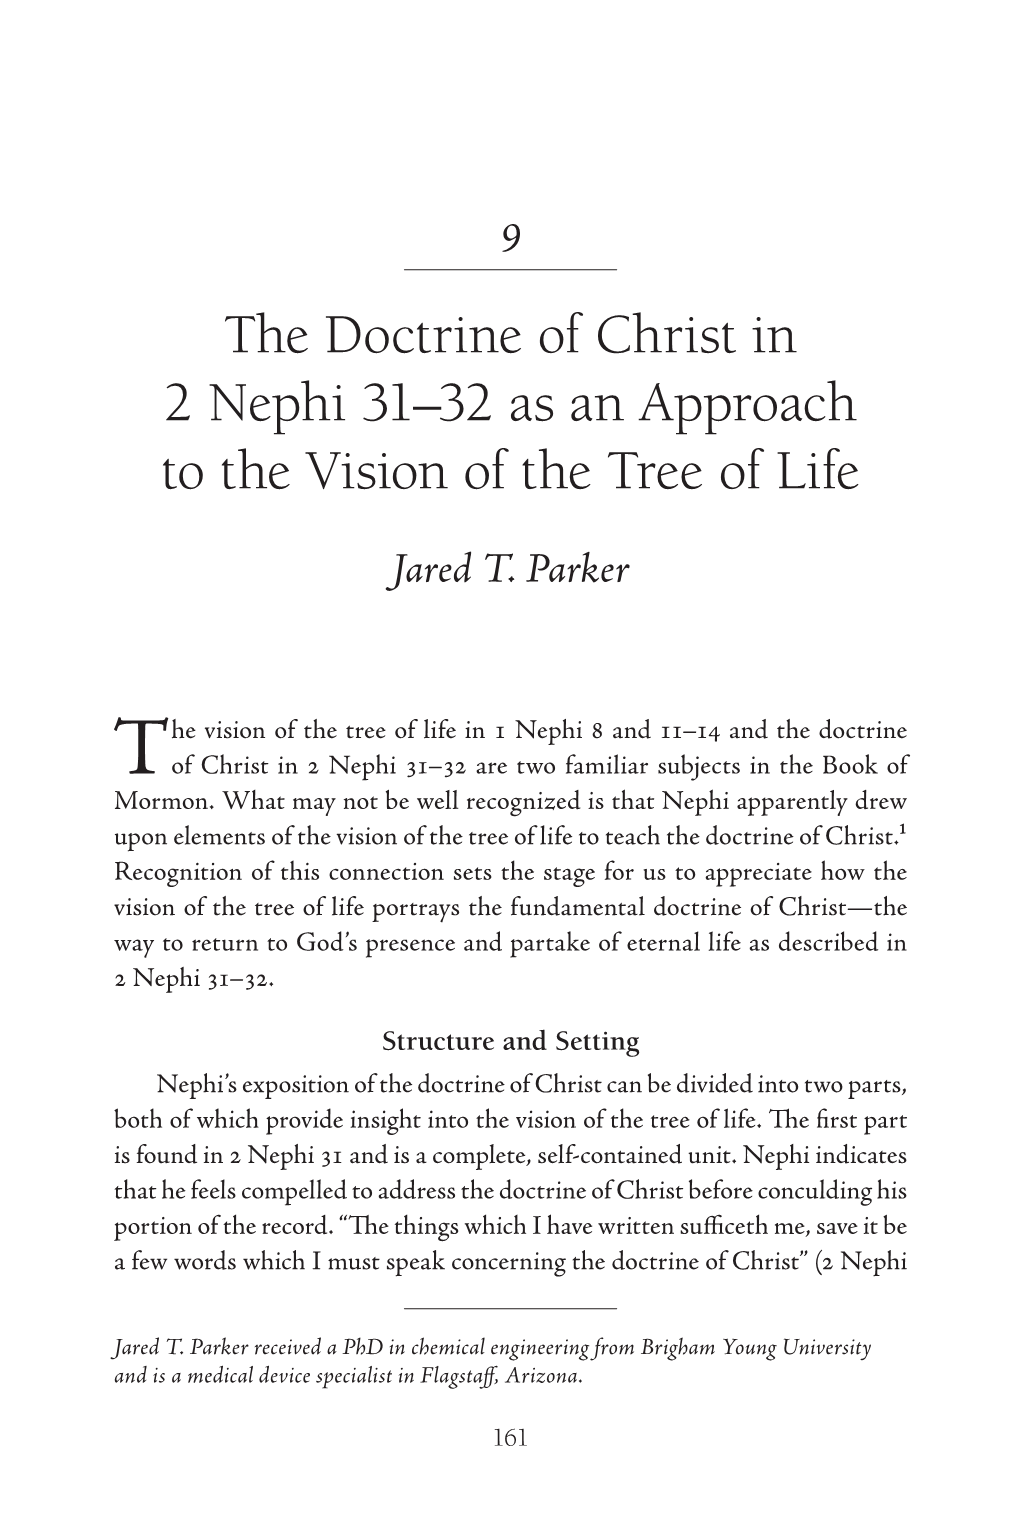 The Doctrine of Christ in 2 Nephi 31–32 As an Approach to the Vision of the Tree of Life